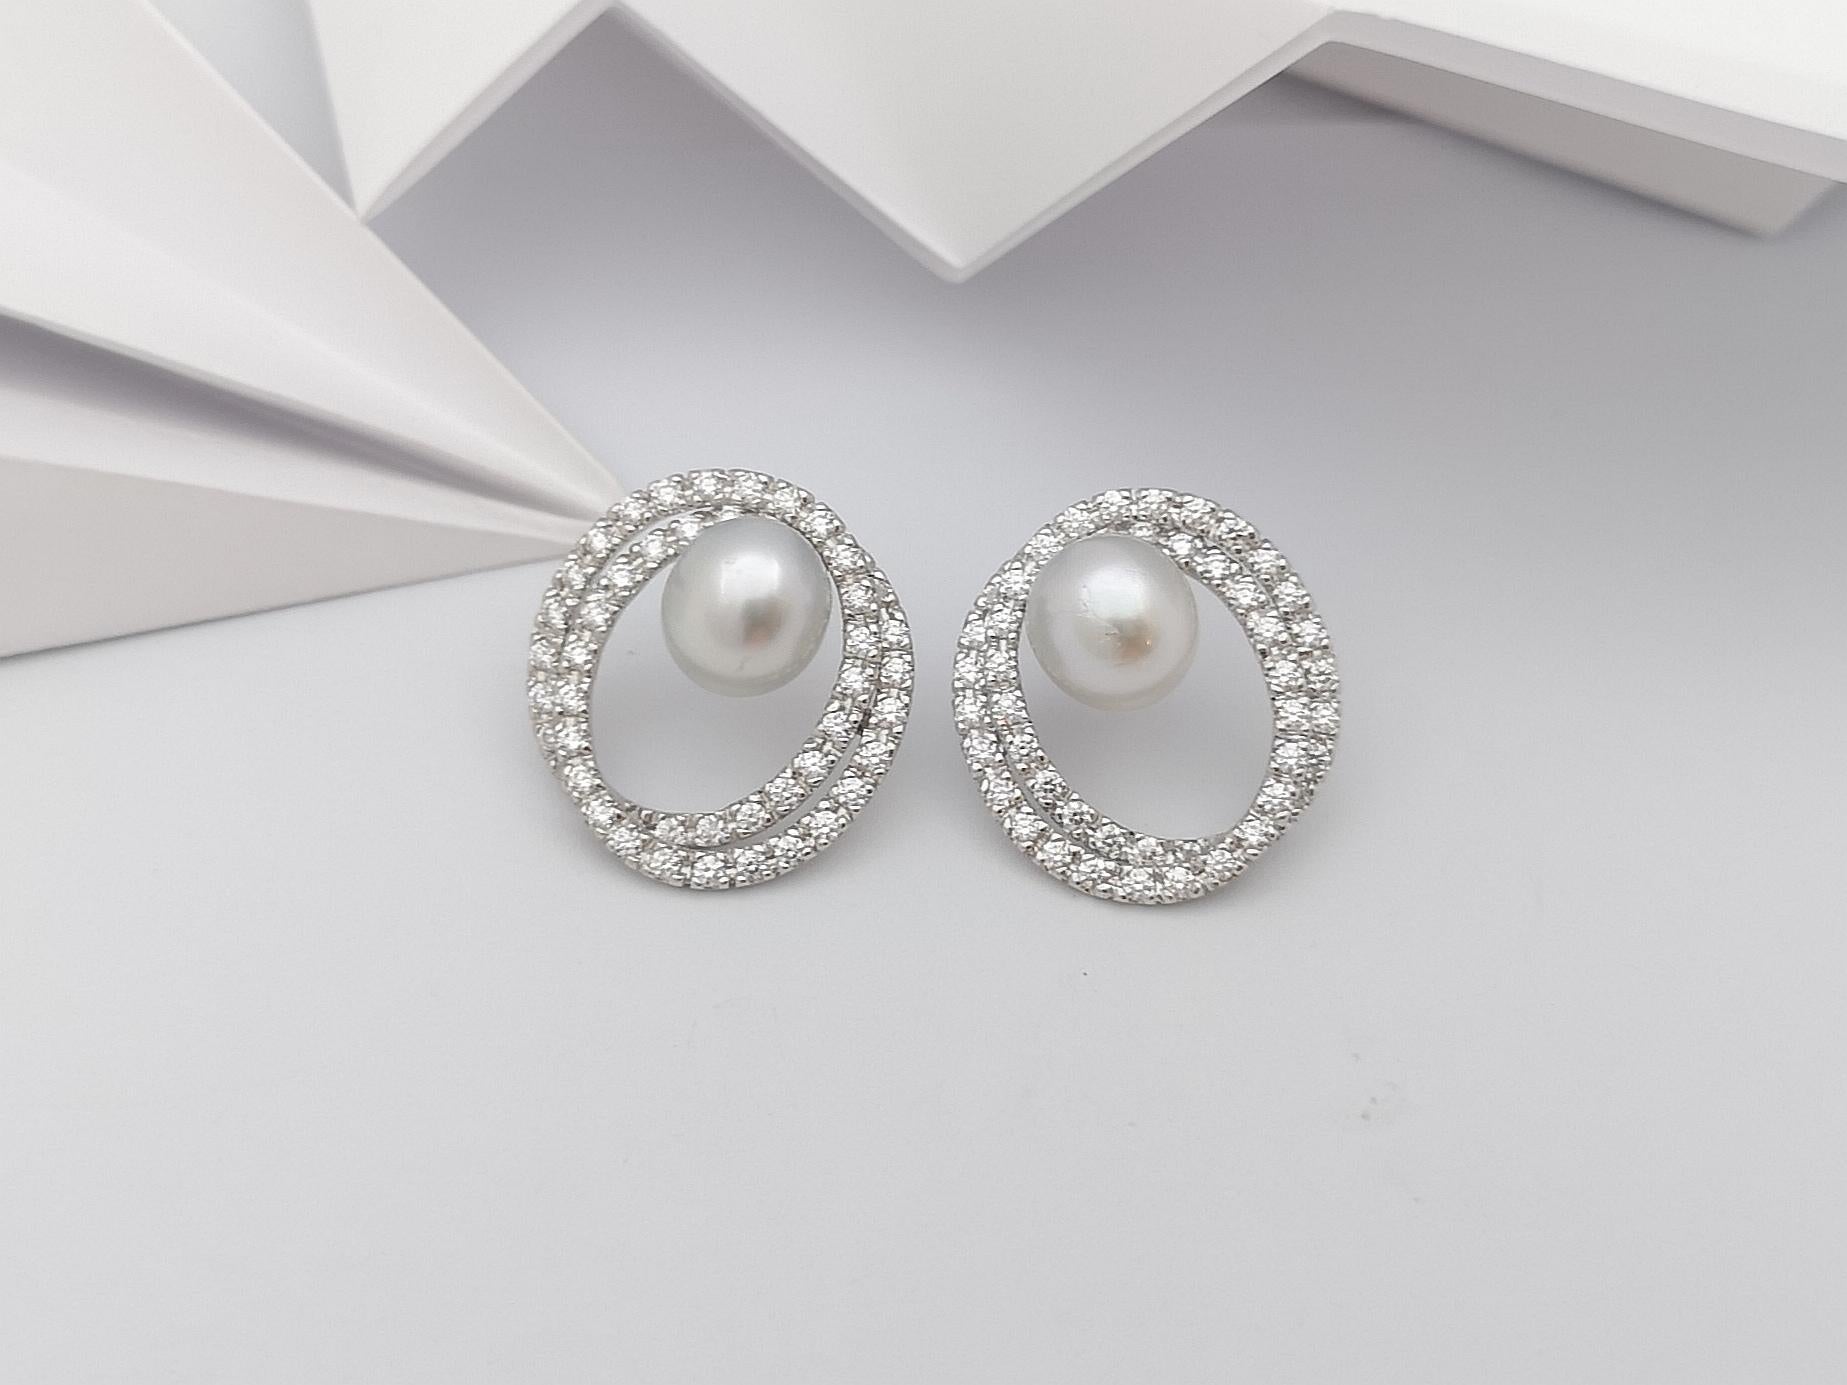 Brilliant Cut South Sea Pearl with Diamond Earrings Set in 18 Karat White Gold Settings For Sale